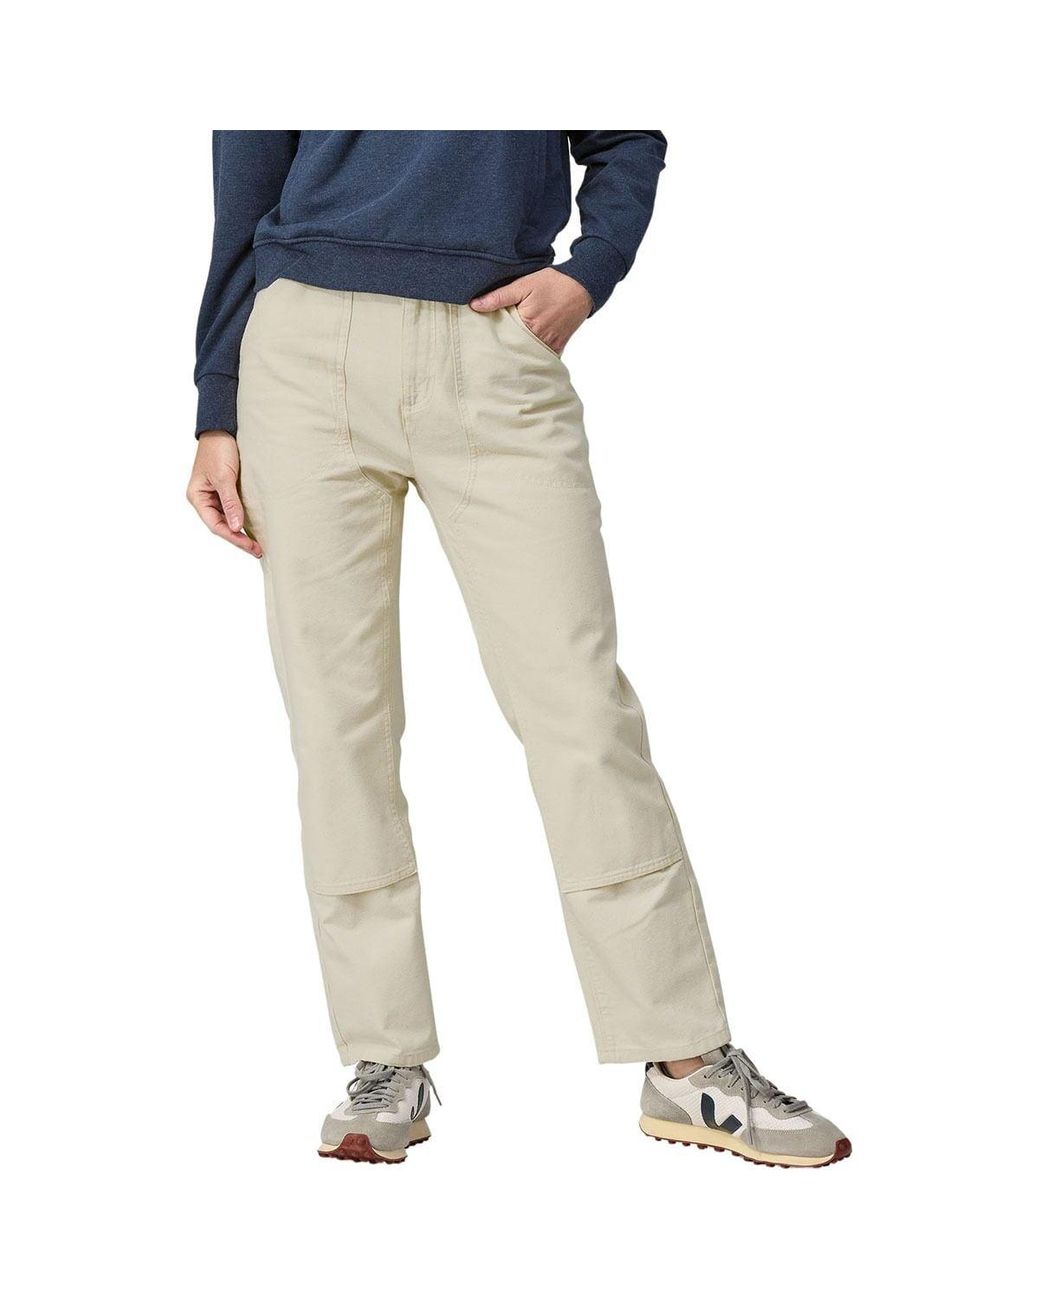 Patagonia Heritage Stand Up Pant in Natural